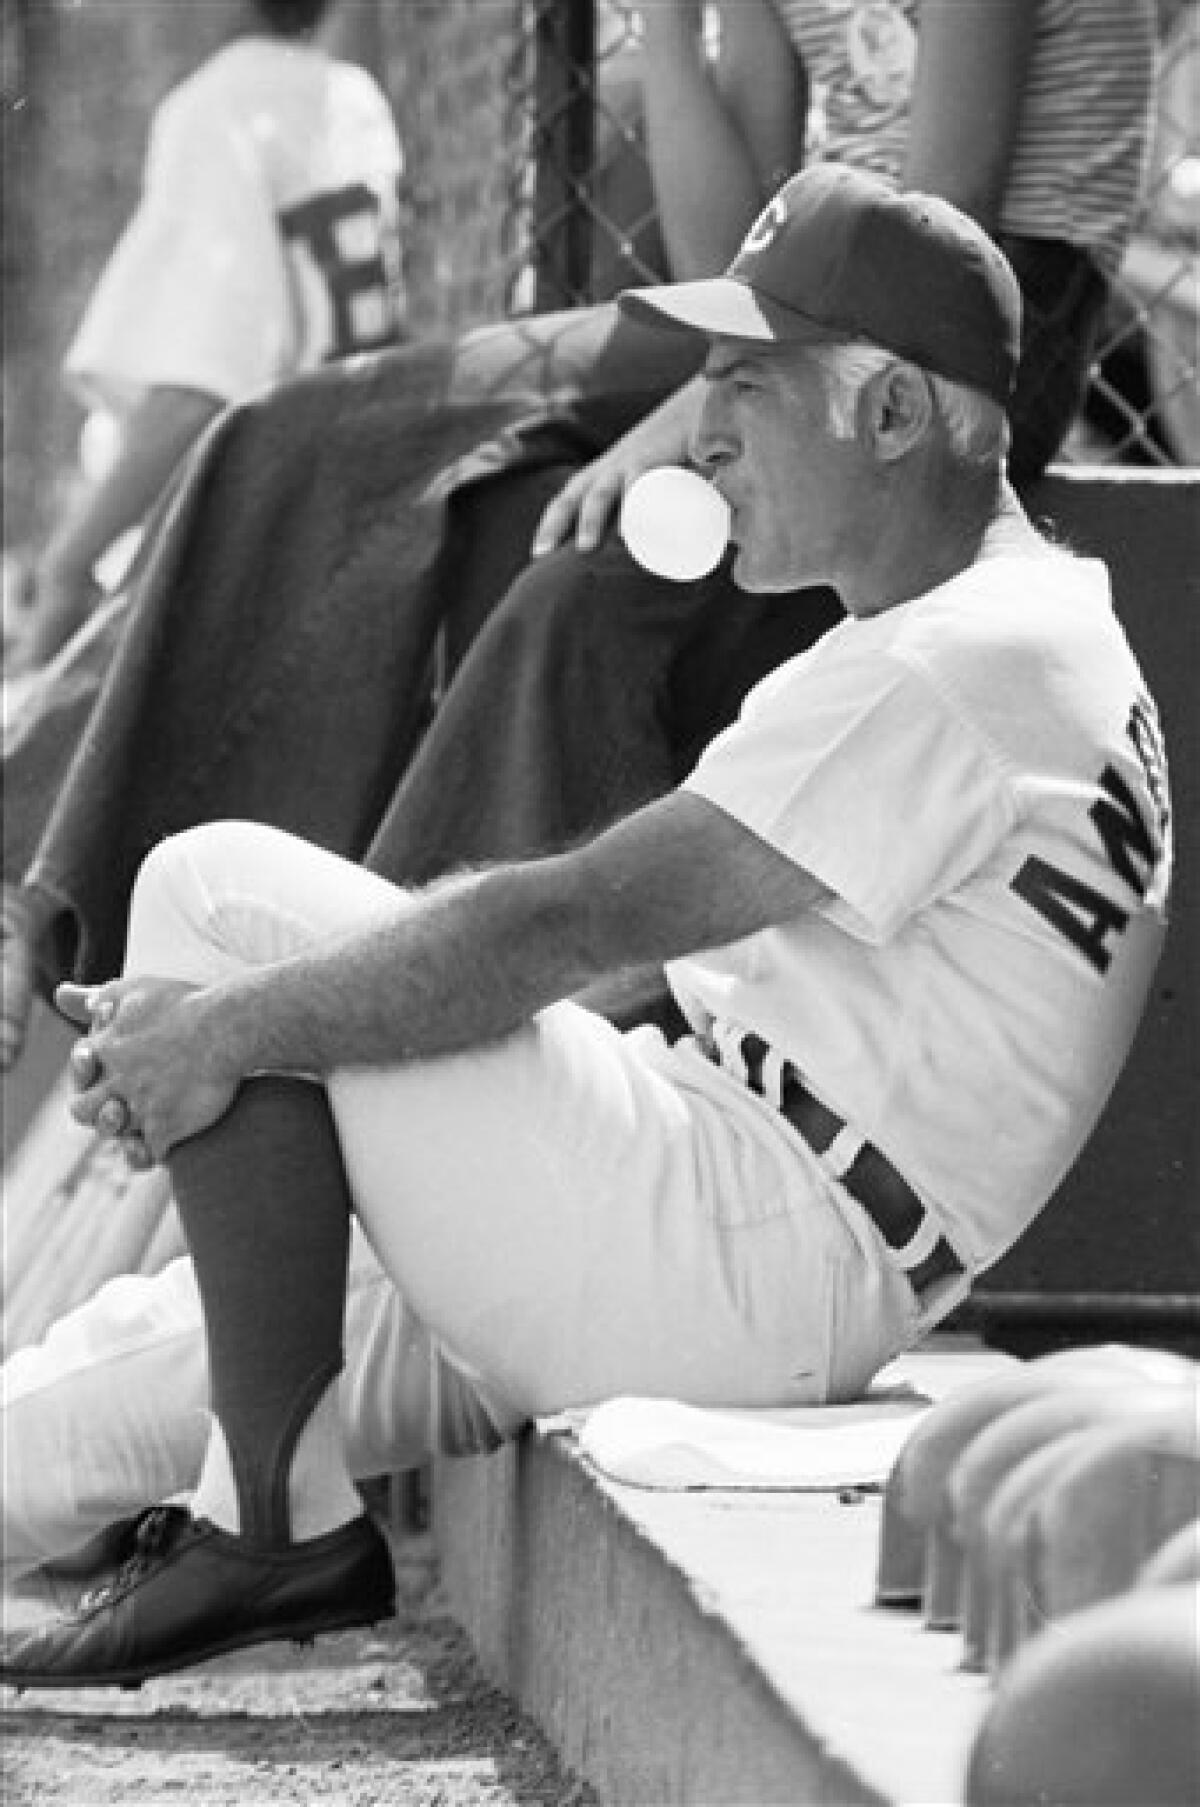 1970 Cincinnati Reds: Sparky Anderson takes over as manager